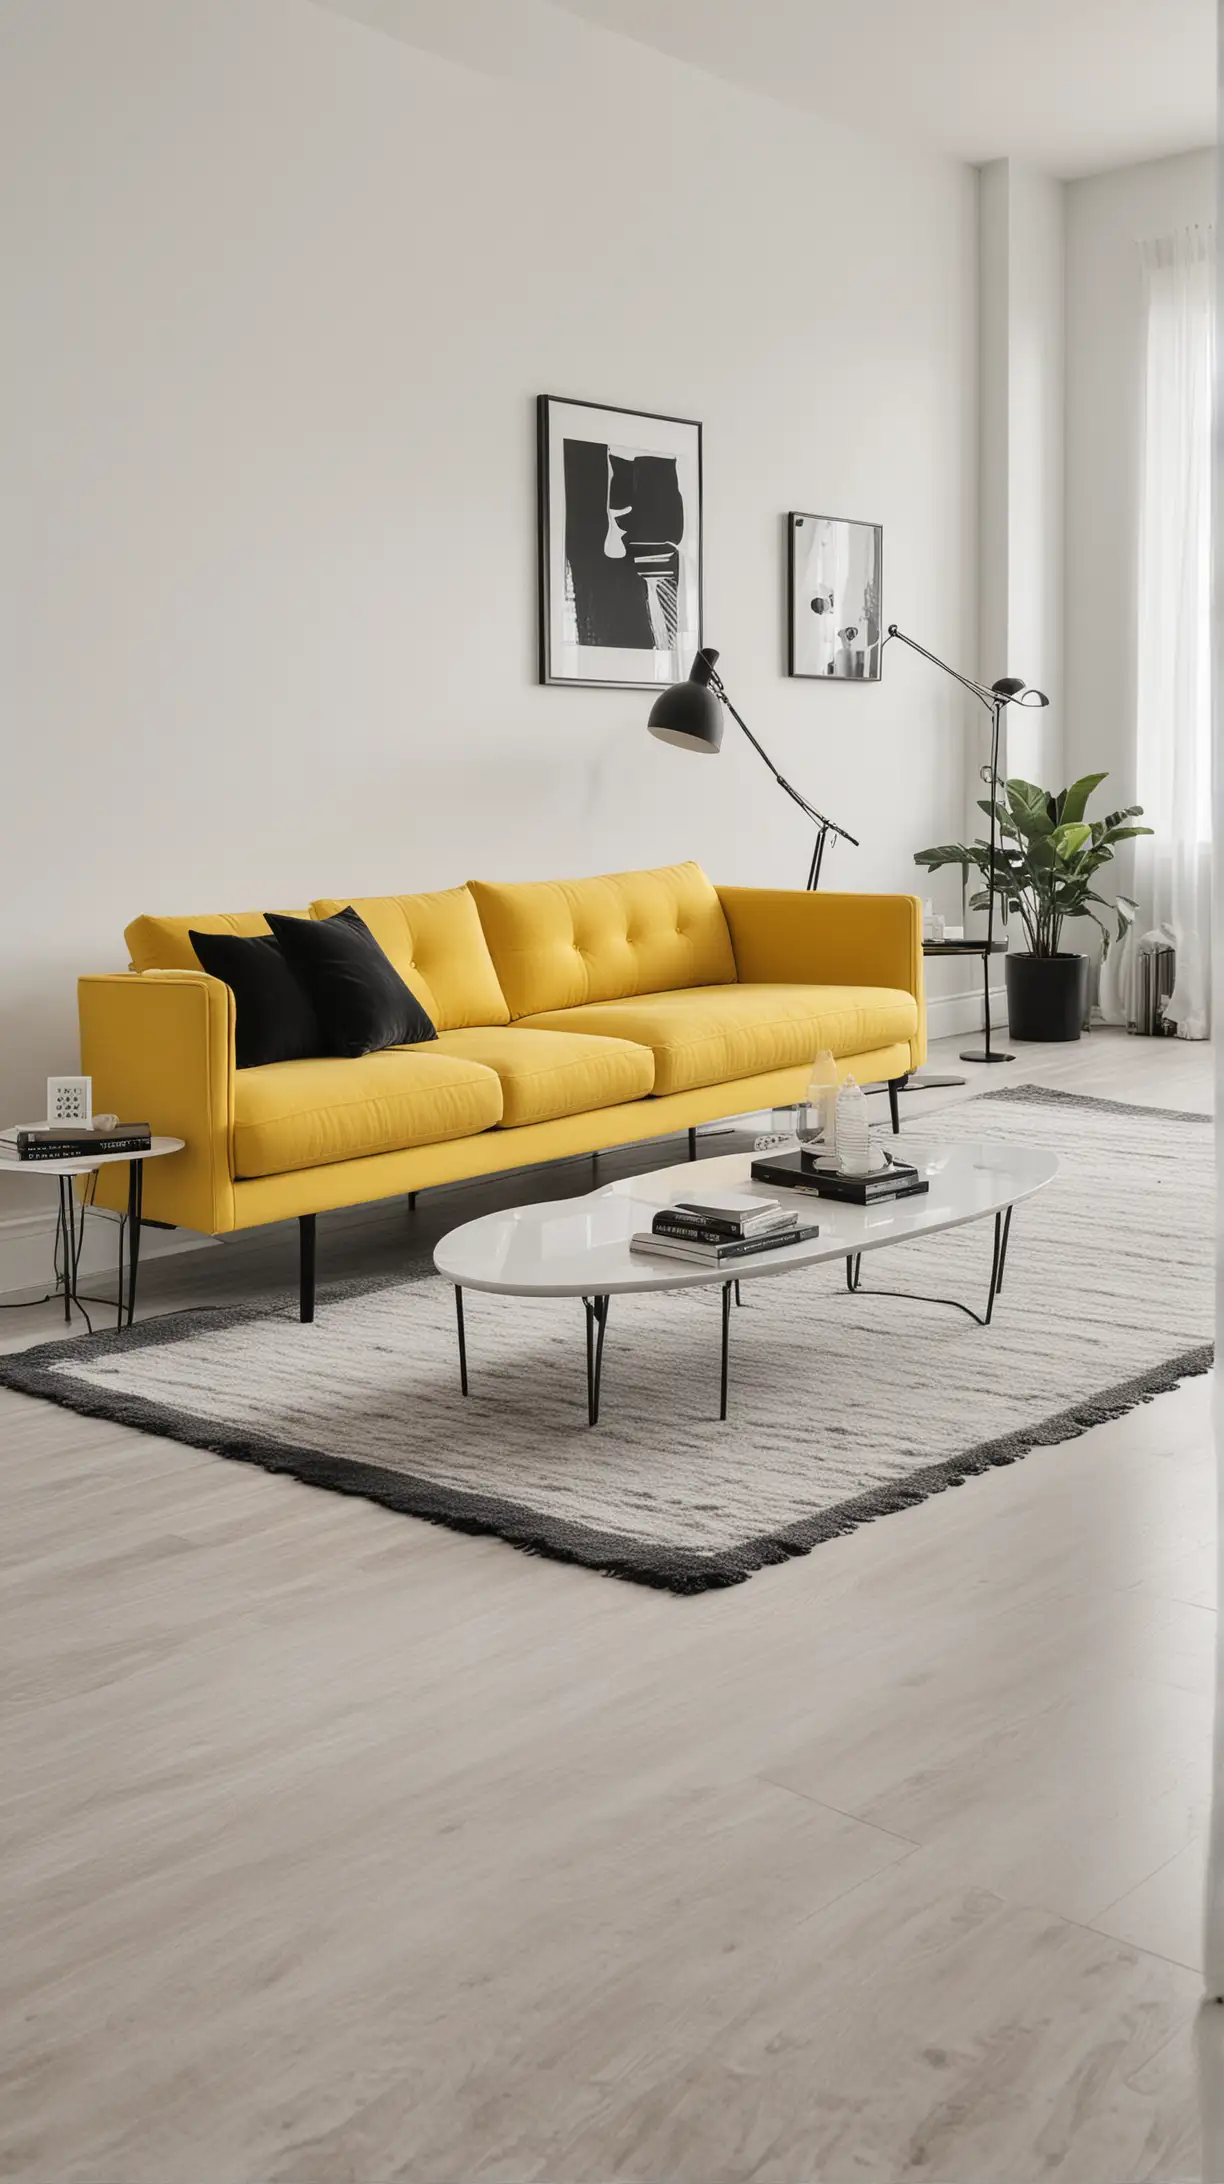 A minimalist living room with a bright yellow couch, black and white accents, sleek modern furniture, and subtle textures. Highlight simplicity and elegance in the space.